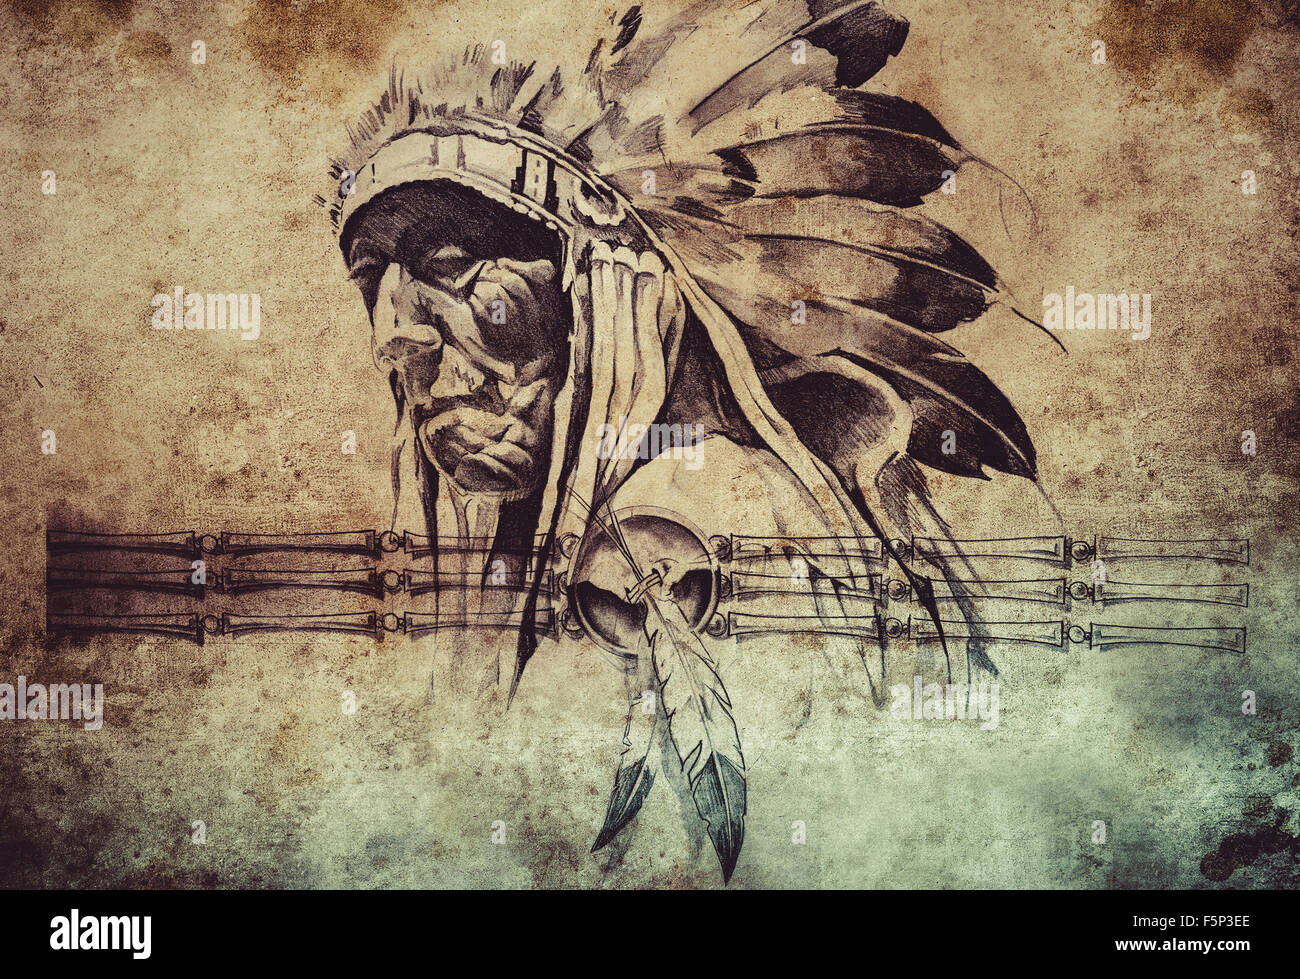 320 Indian Warrior Tattoo Stock Photos Pictures  RoyaltyFree Images   iStock